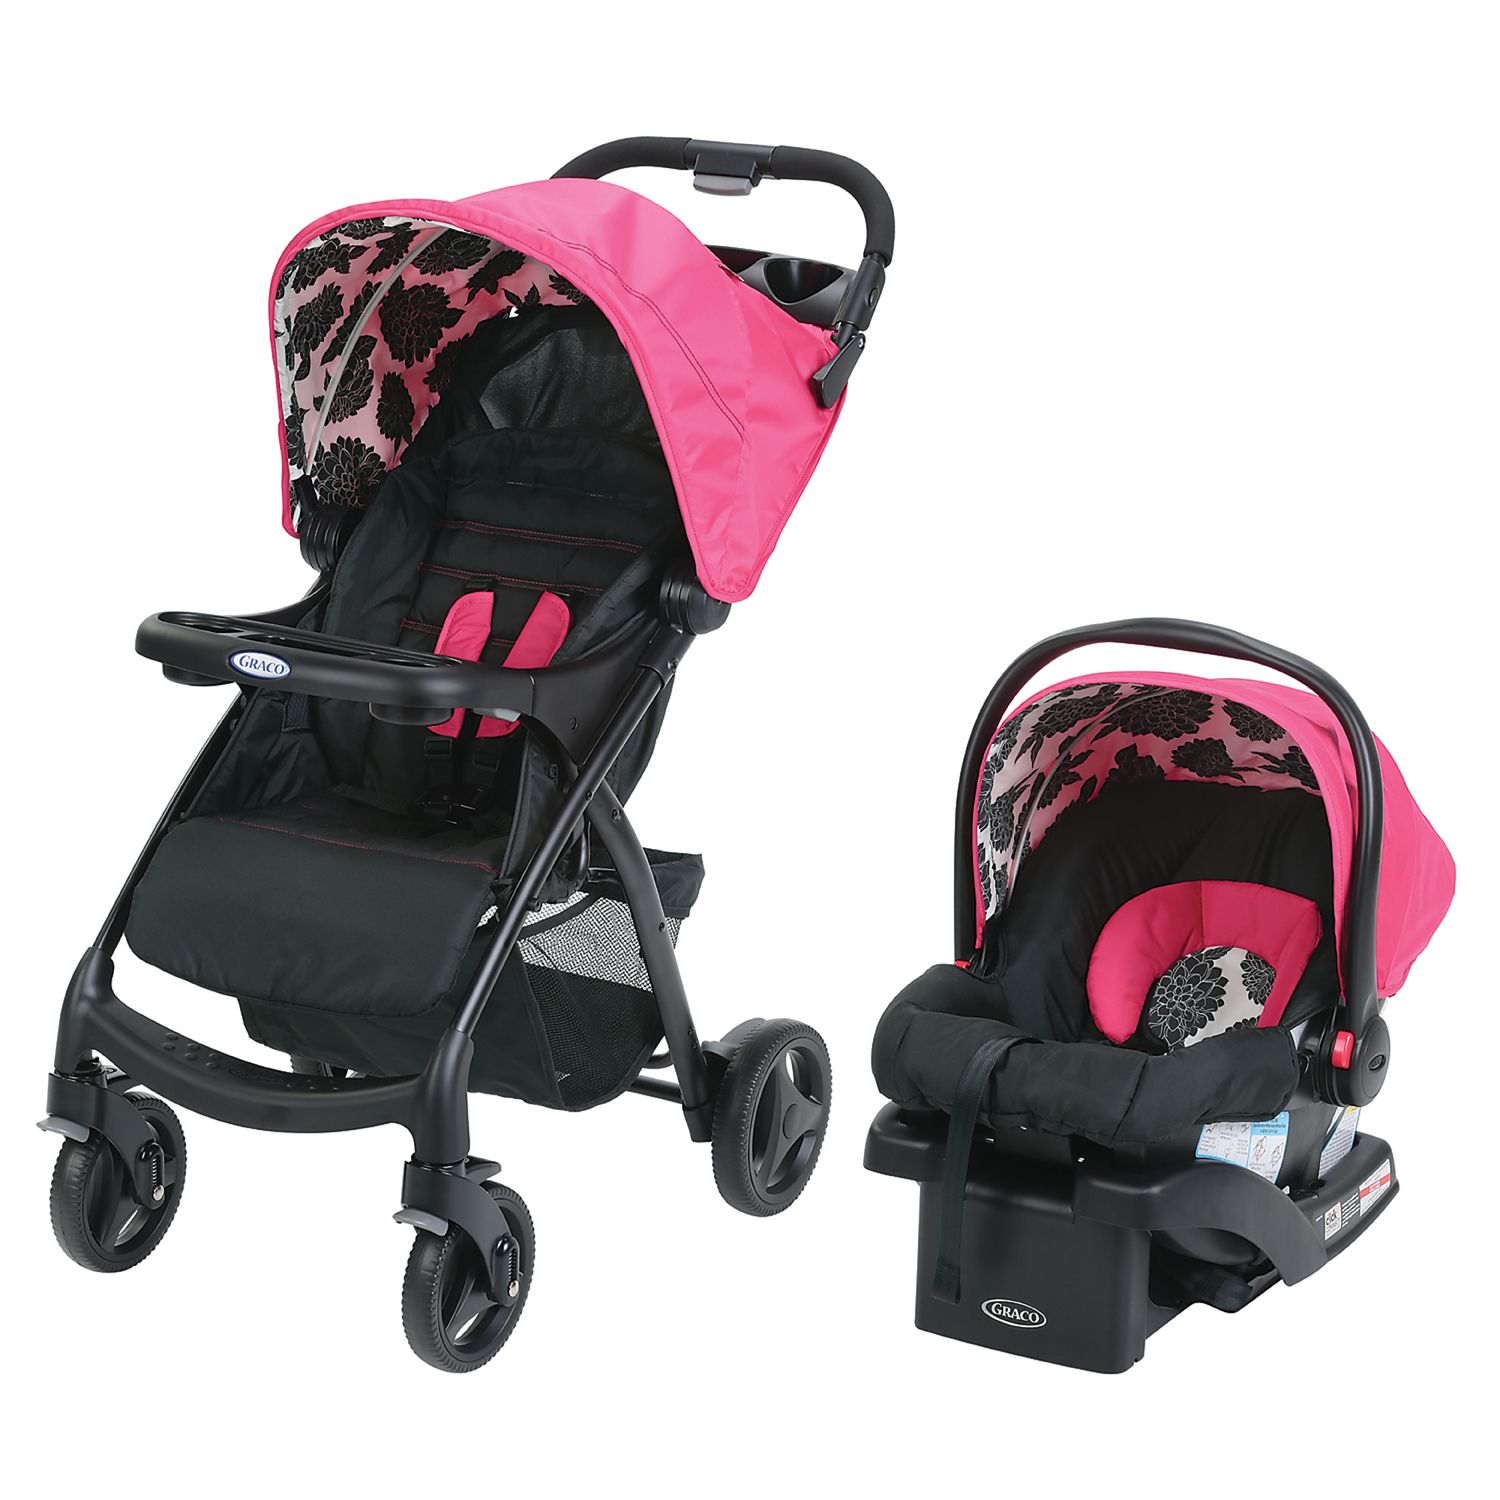 baby car seat and stroller girl